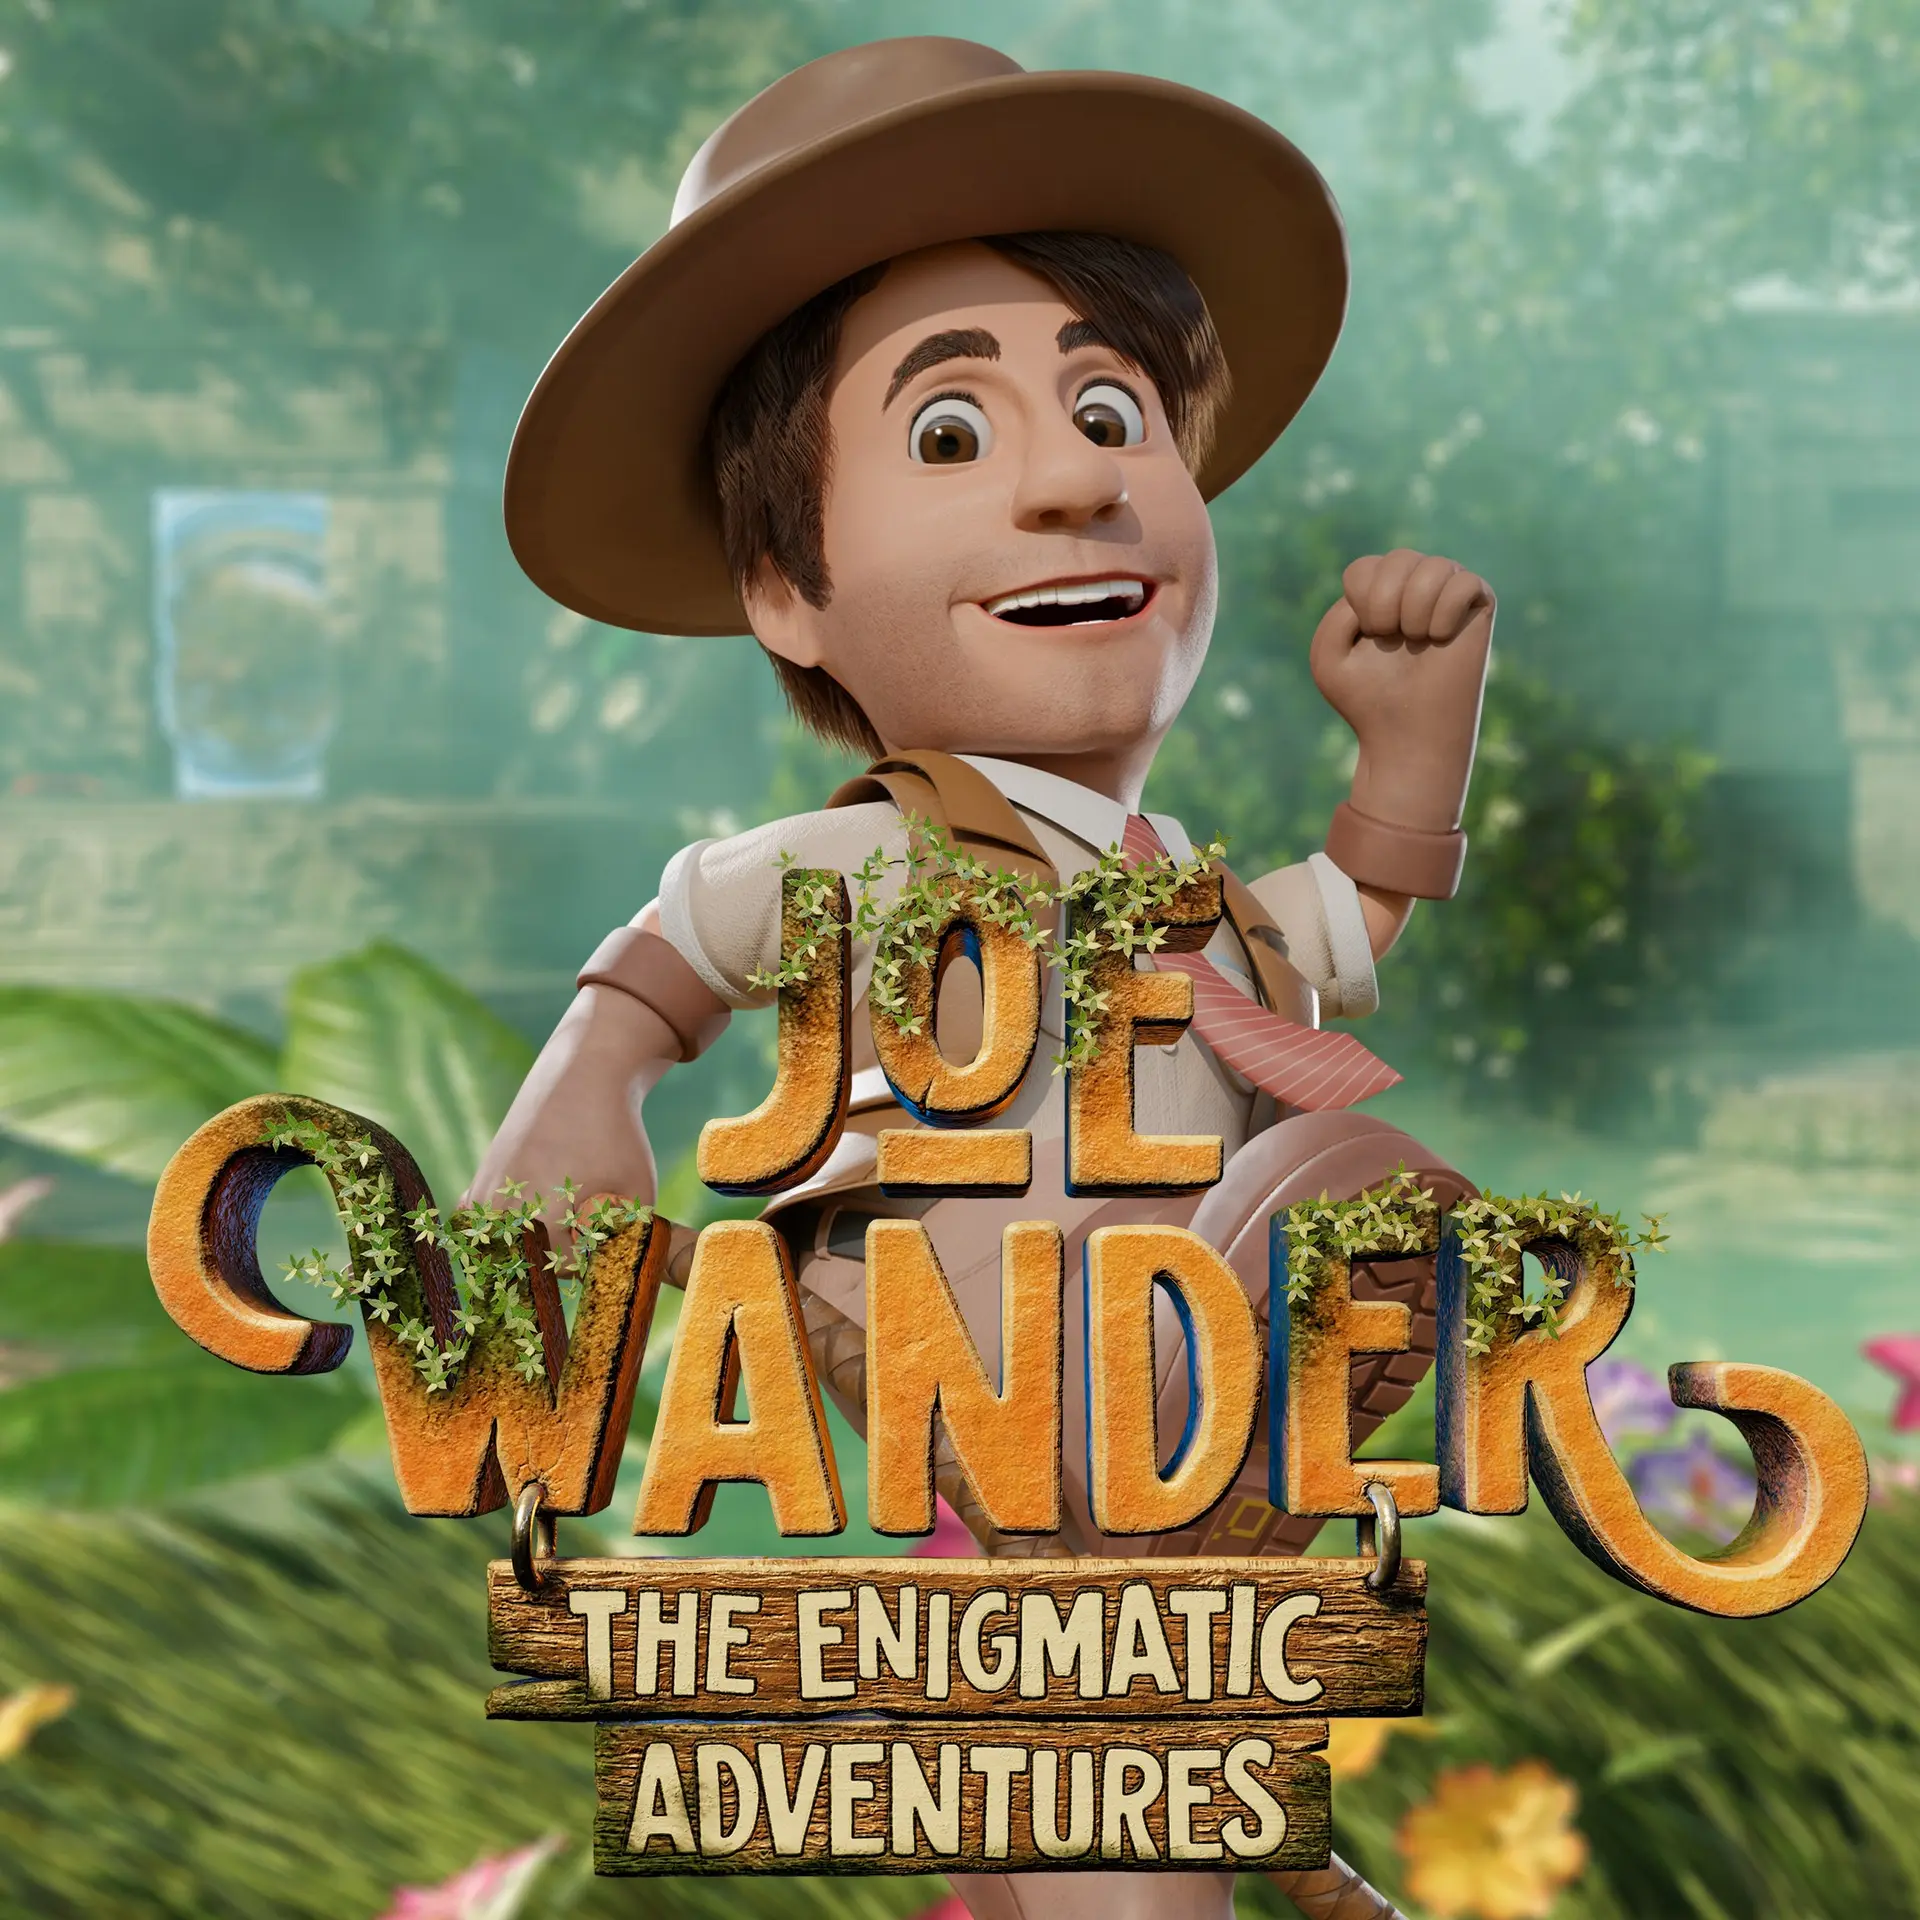 Joe Wander and the Enigmatic adventures (Xbox Games US)